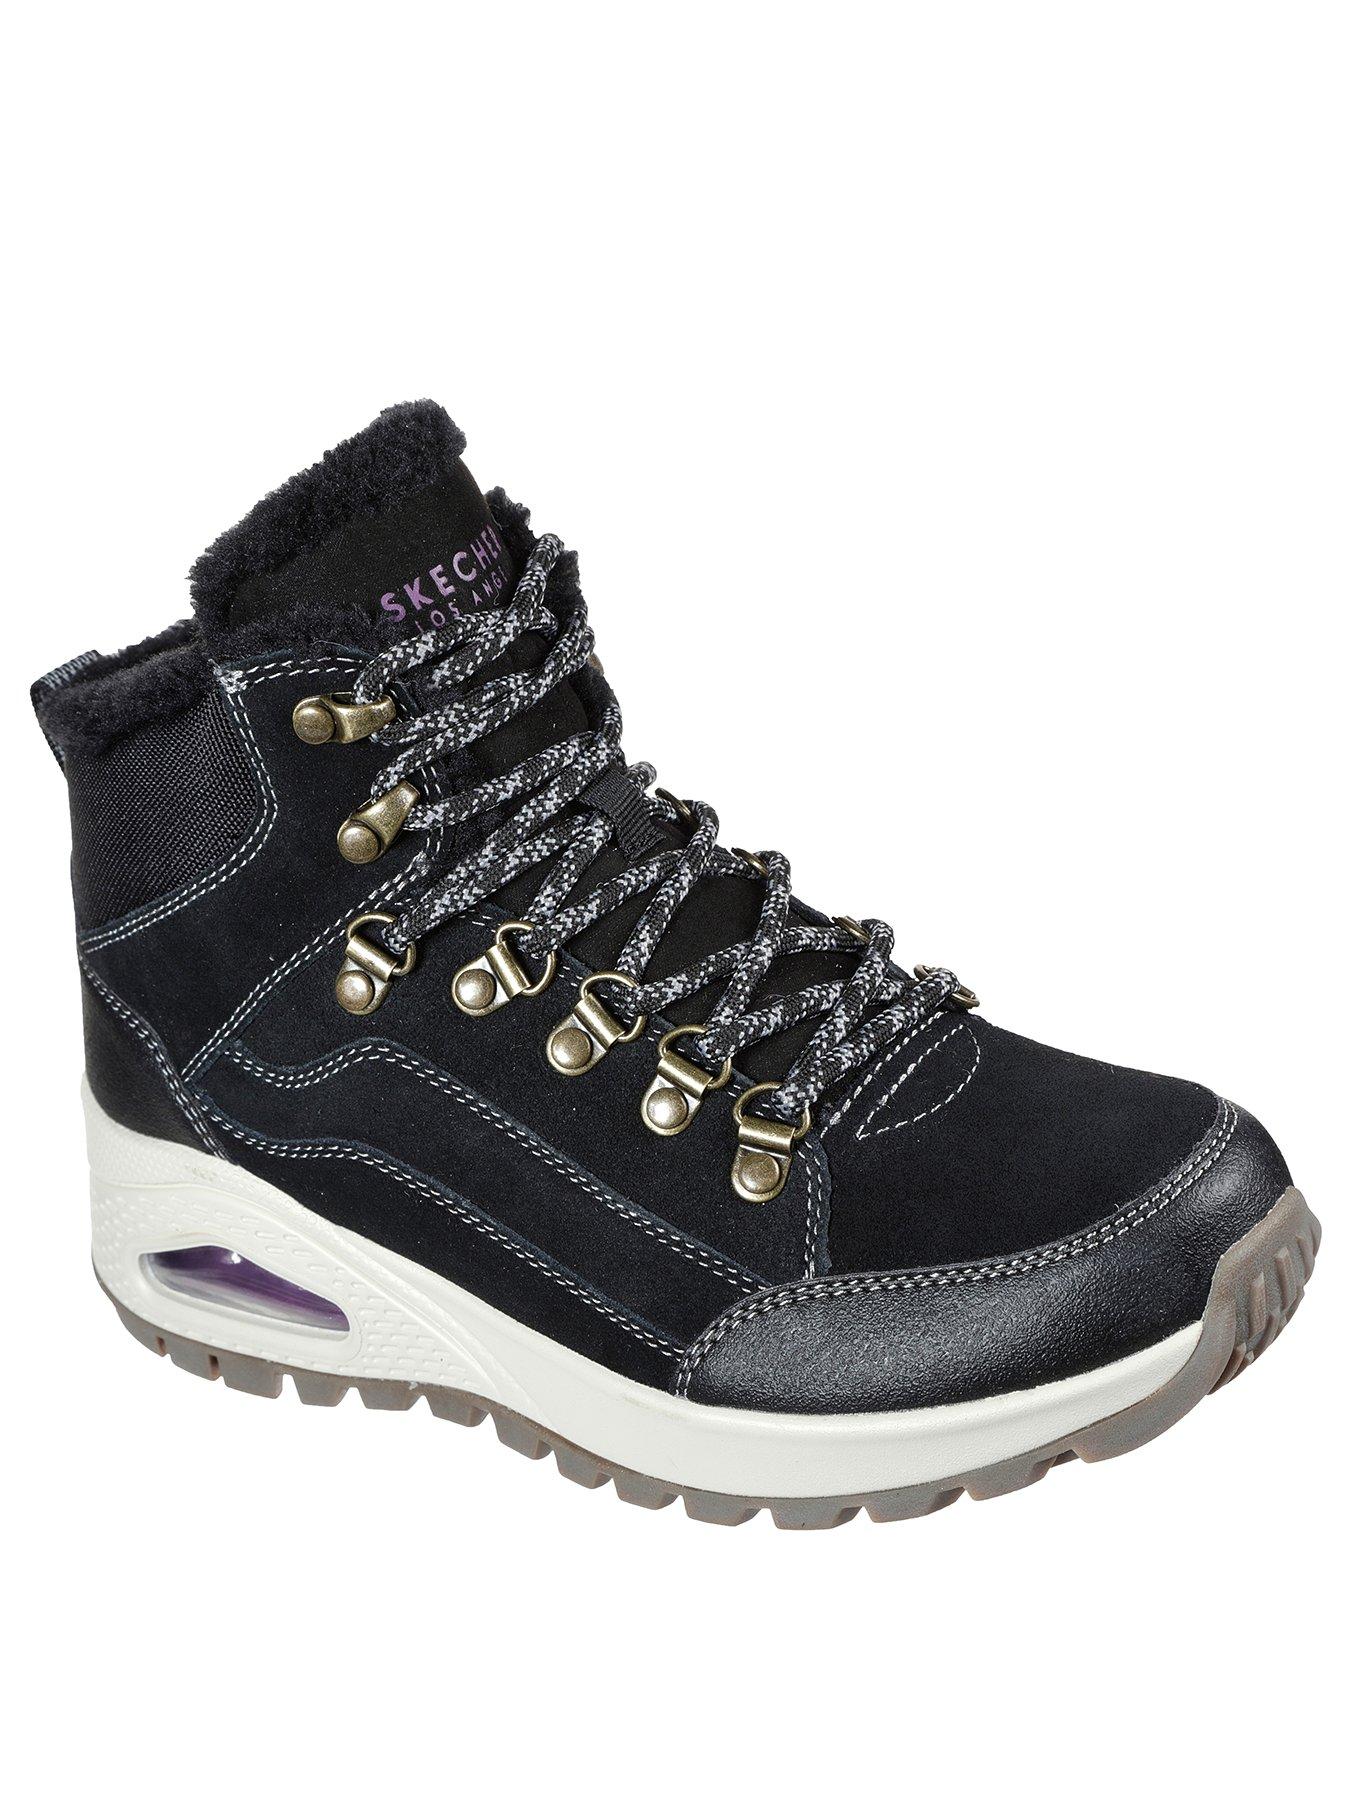 Shoes & boots Uno Rugged Winter Feels Ankle Boots